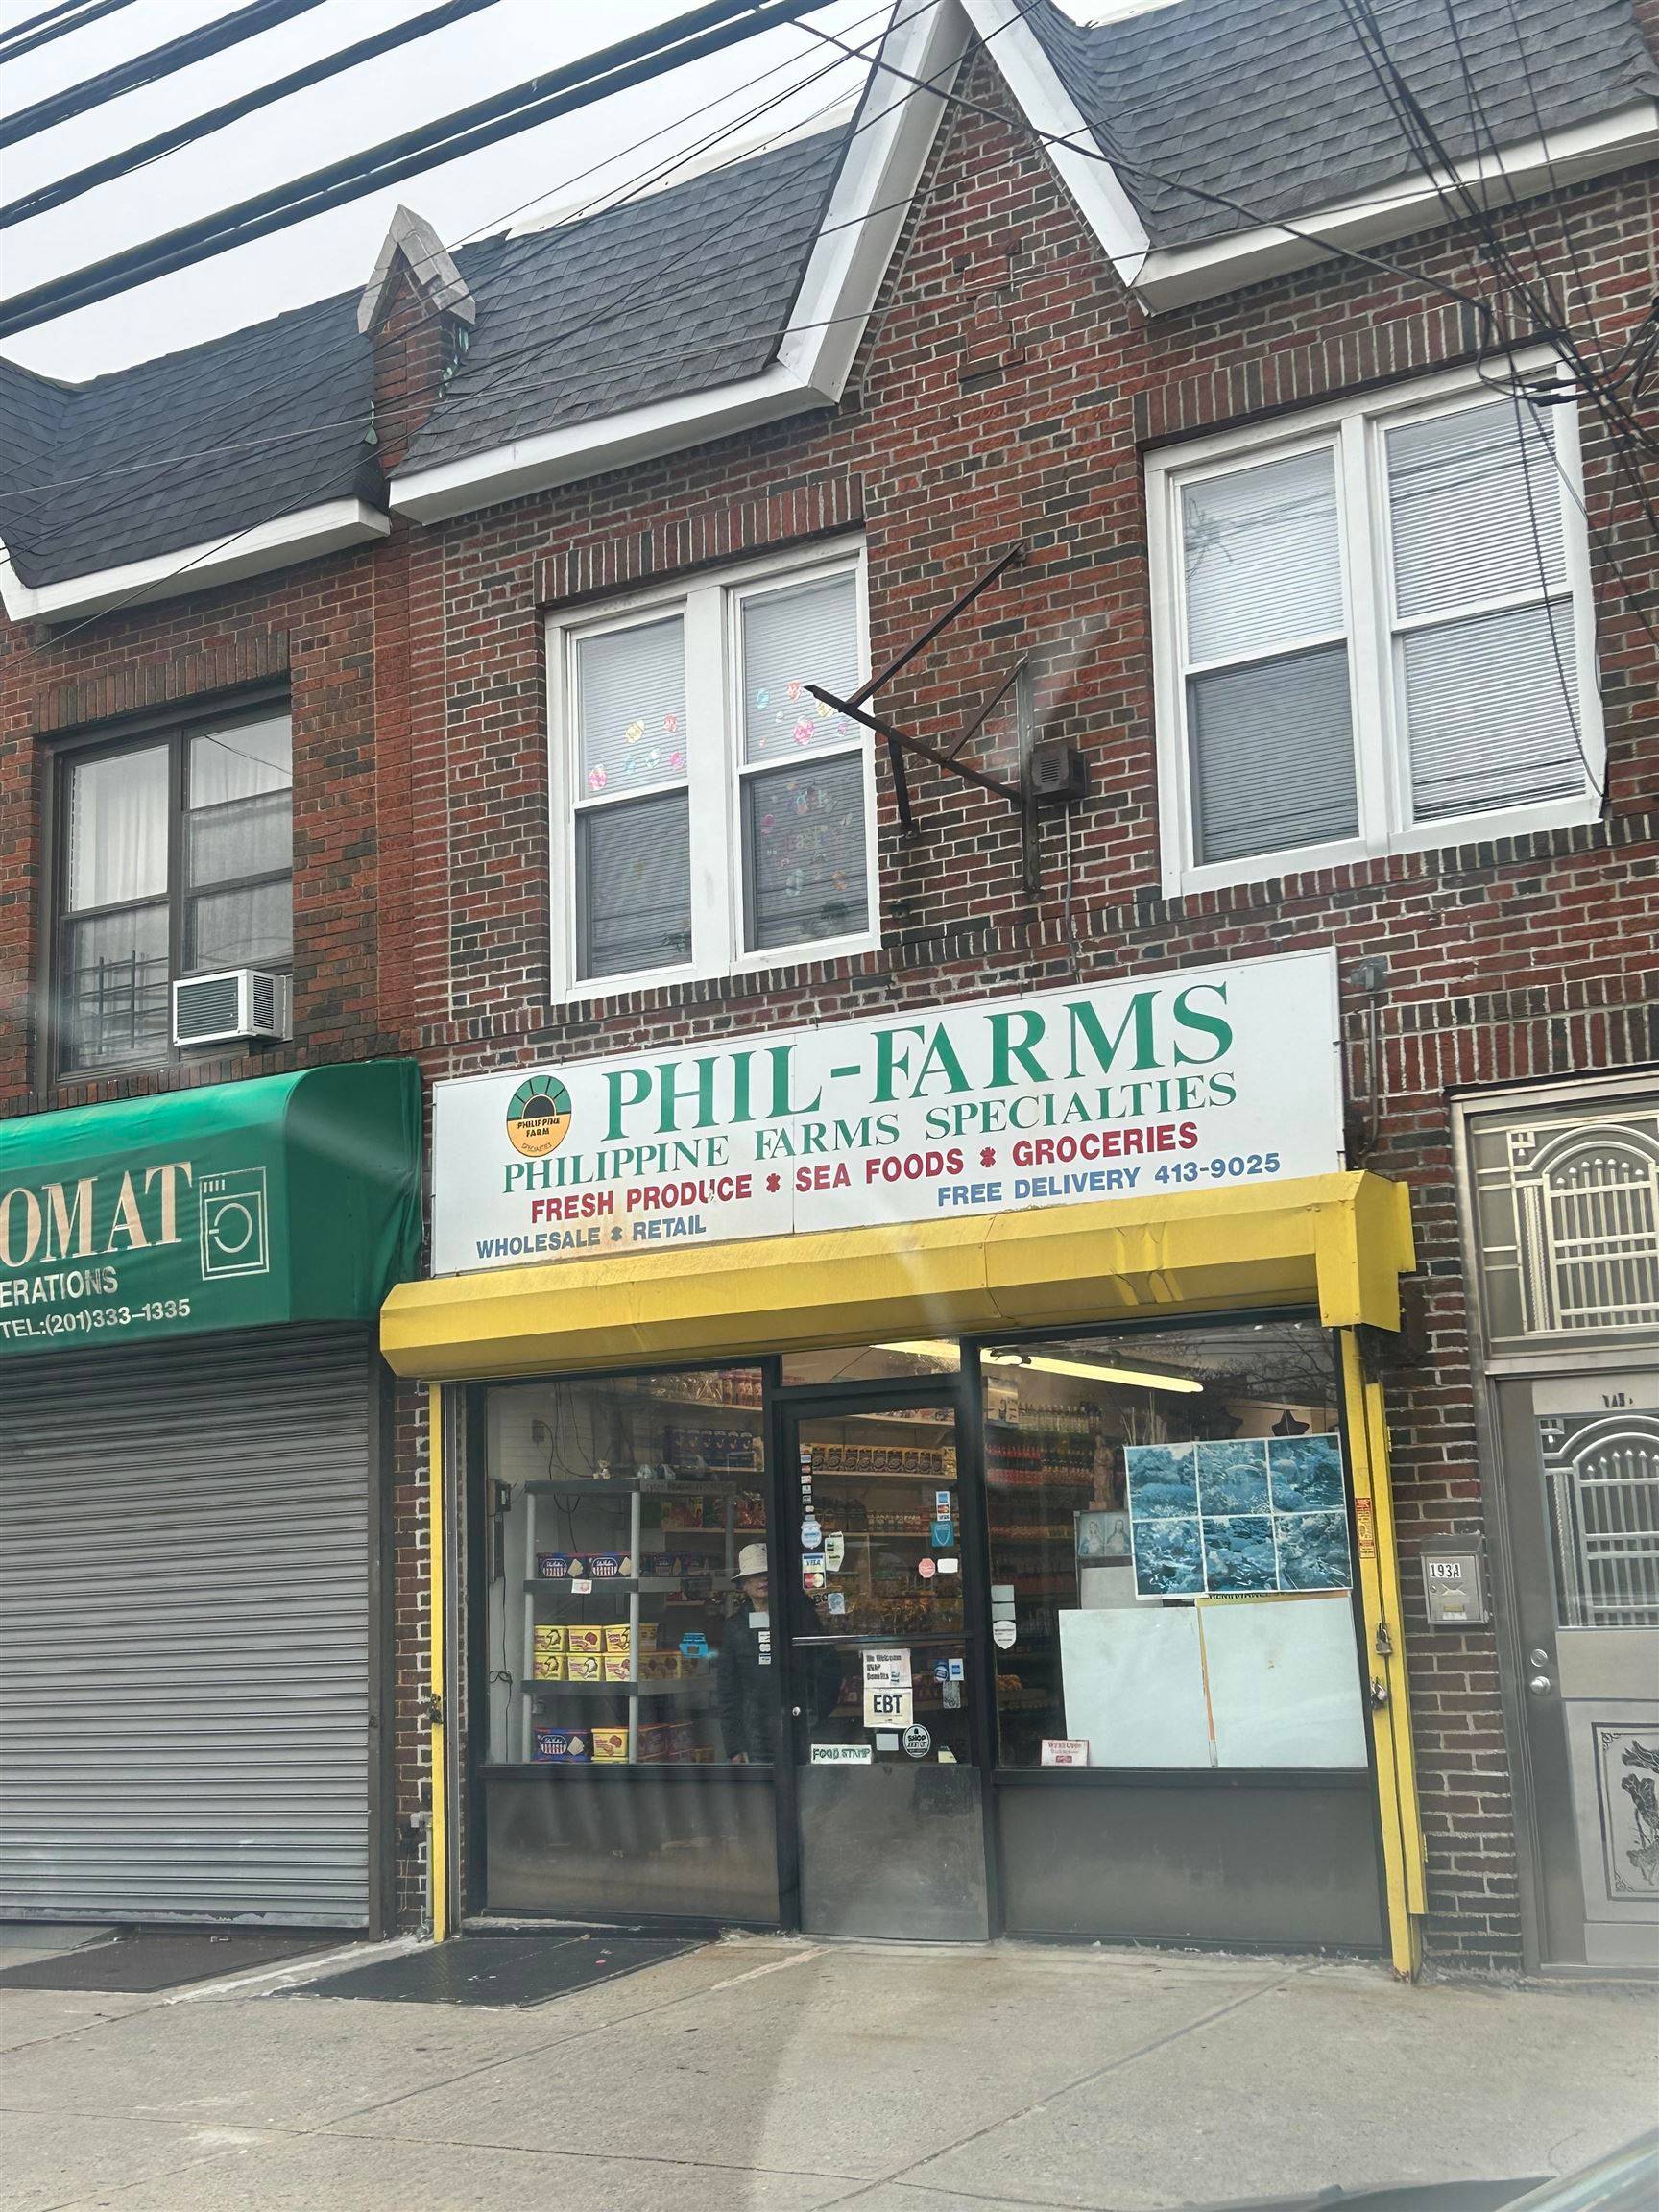 193A MALLORY AVE Commercial New Jersey